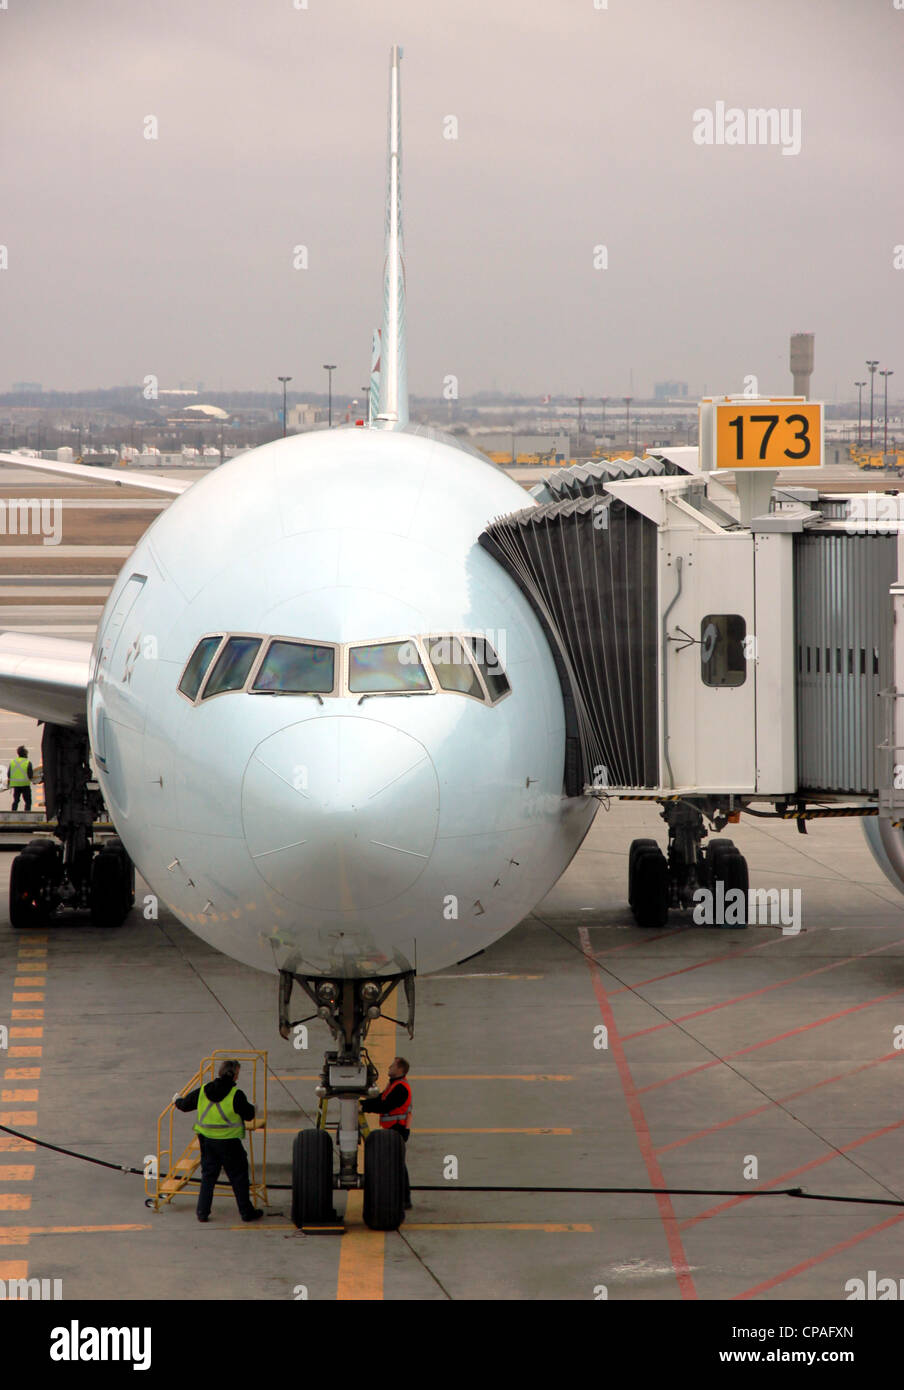 An airplane at a gate of the Toronto Pearson Airport Stock Photo